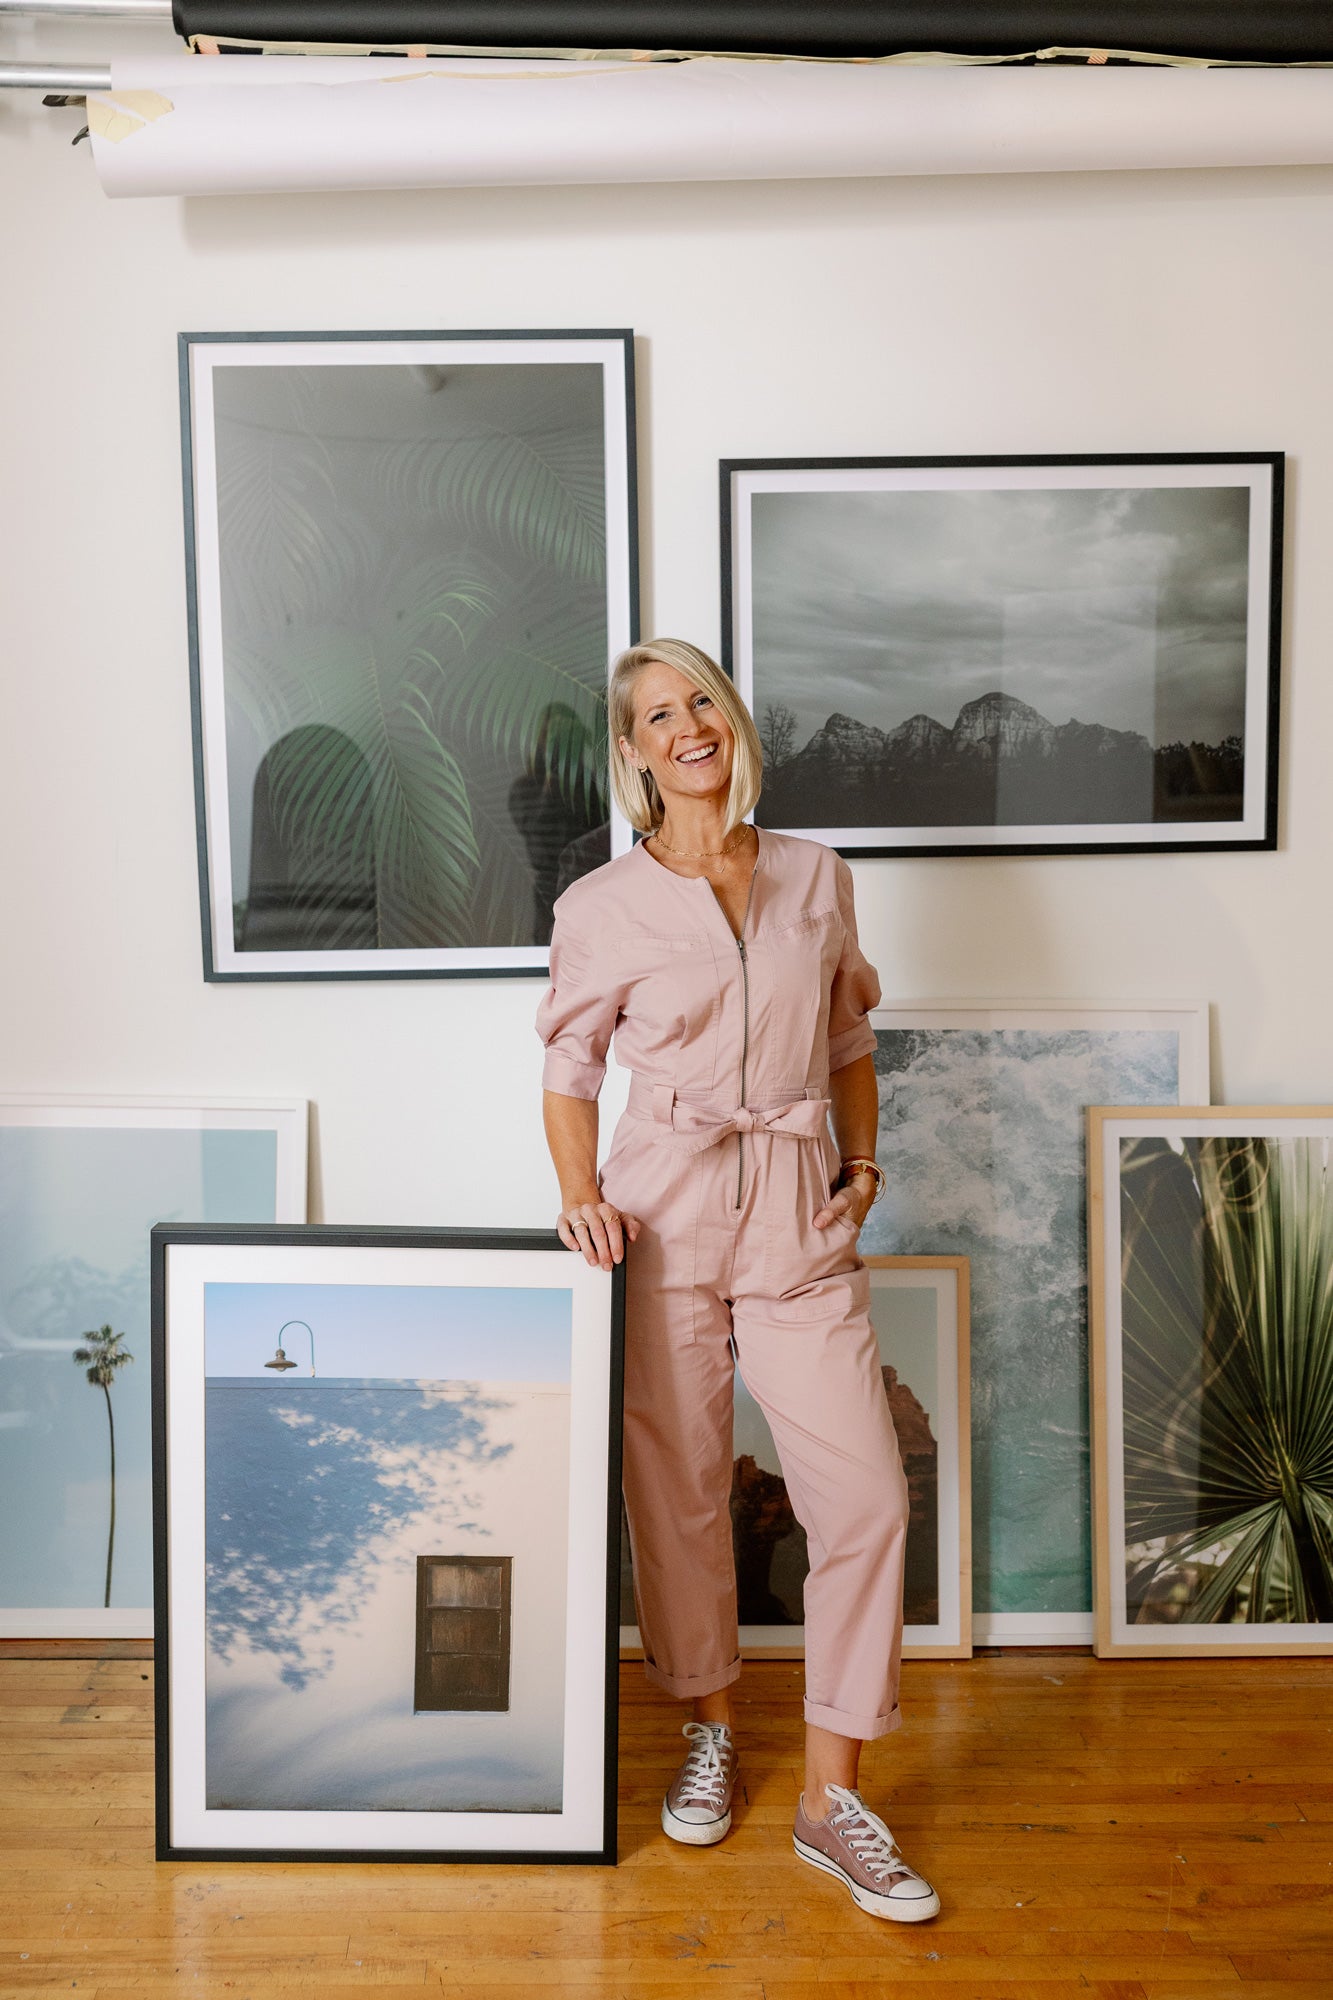 Amanda Anderson in her photography studio with framed prints